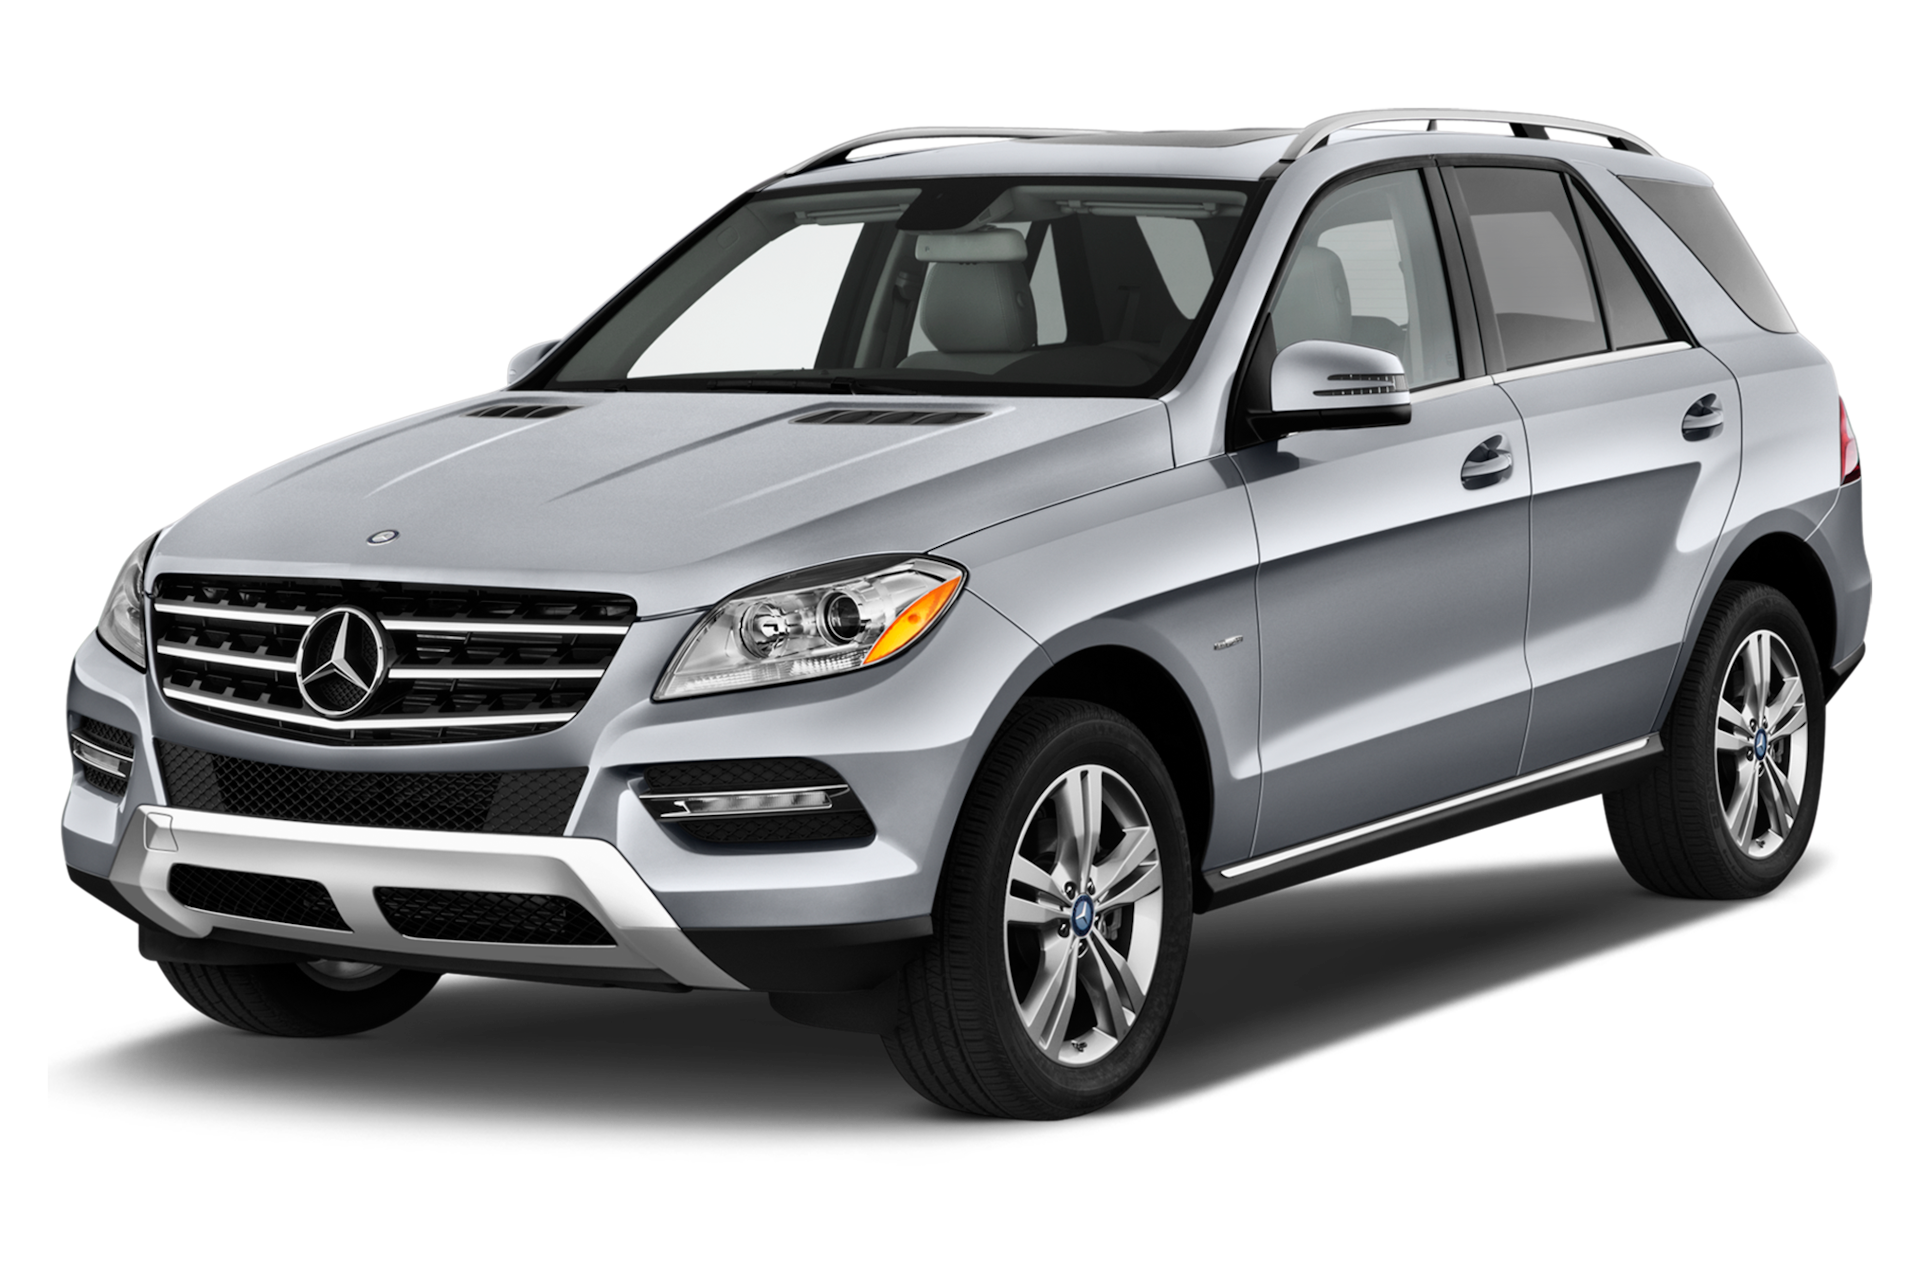 2013 Mercedes-Benz M-Class Prices, Reviews, and Photos - MotorTrend